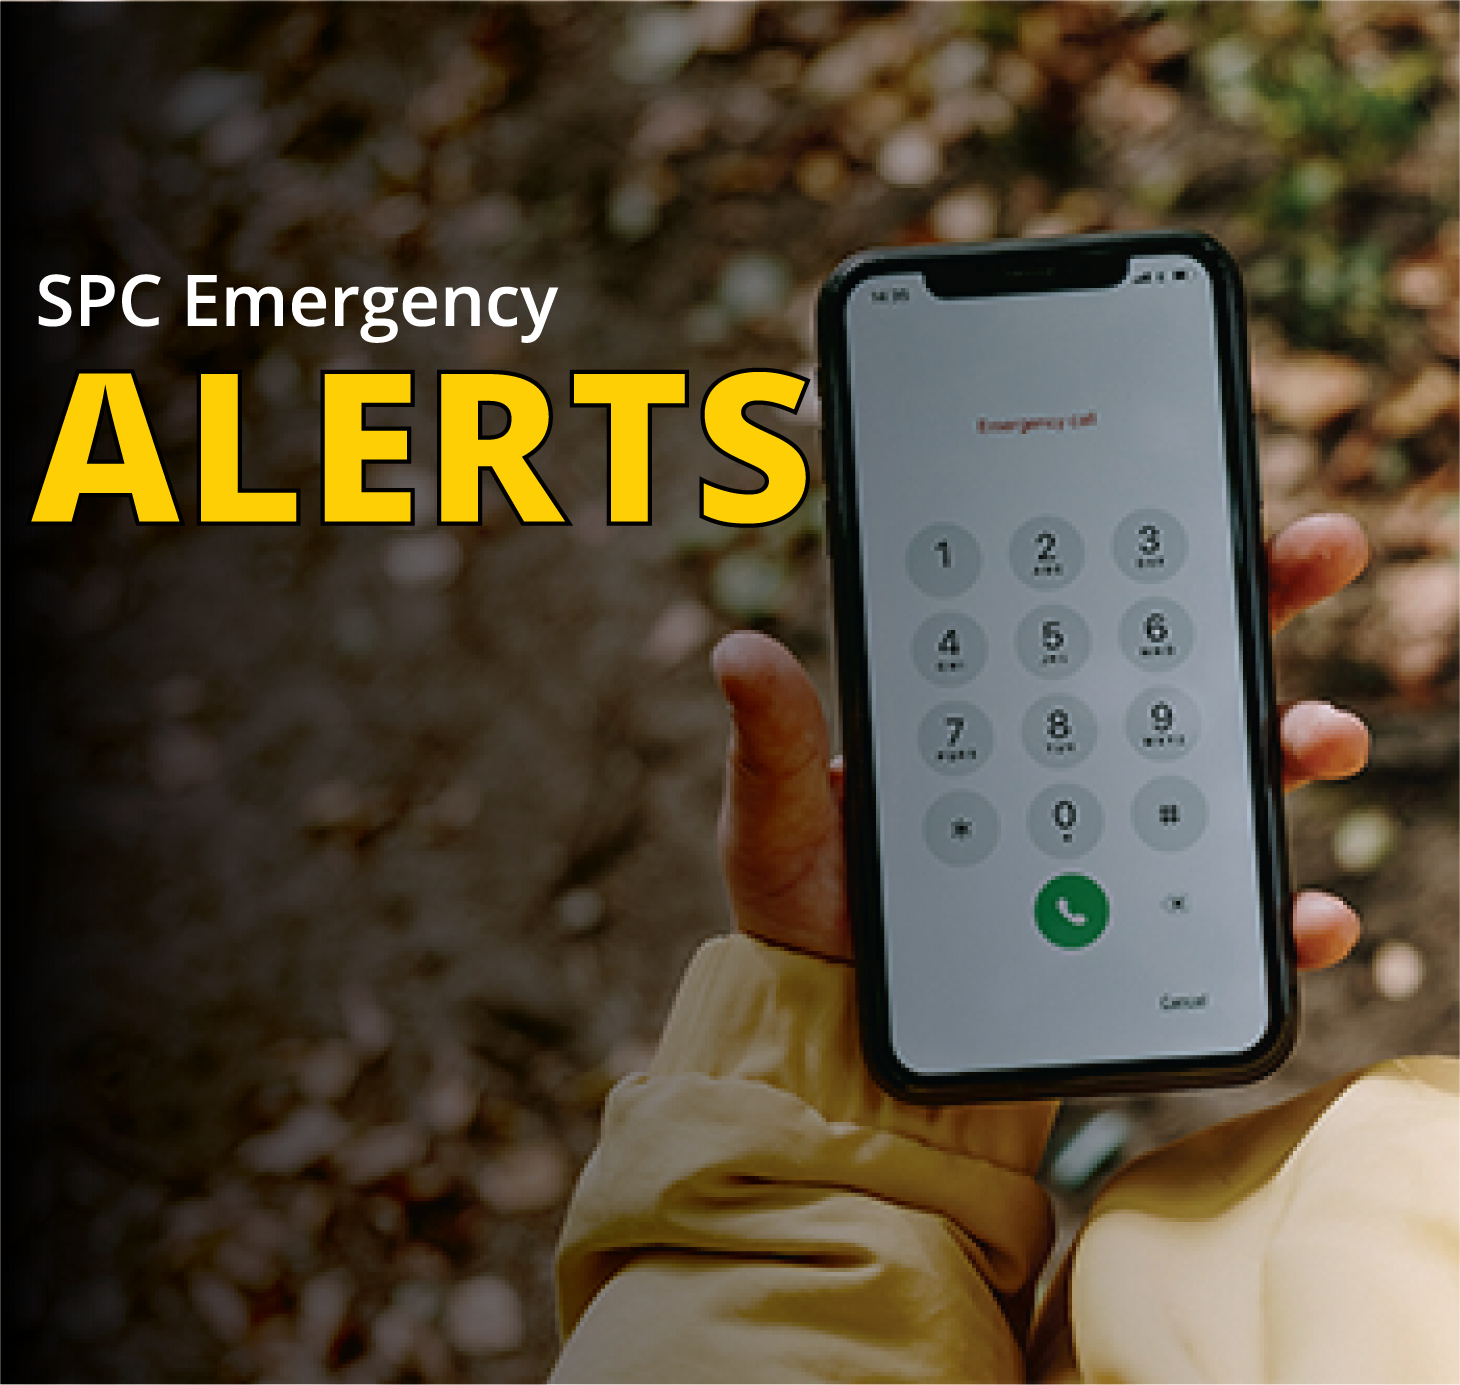 SPC Emergency alerts text in yellow next to image of someone holding a cell phone